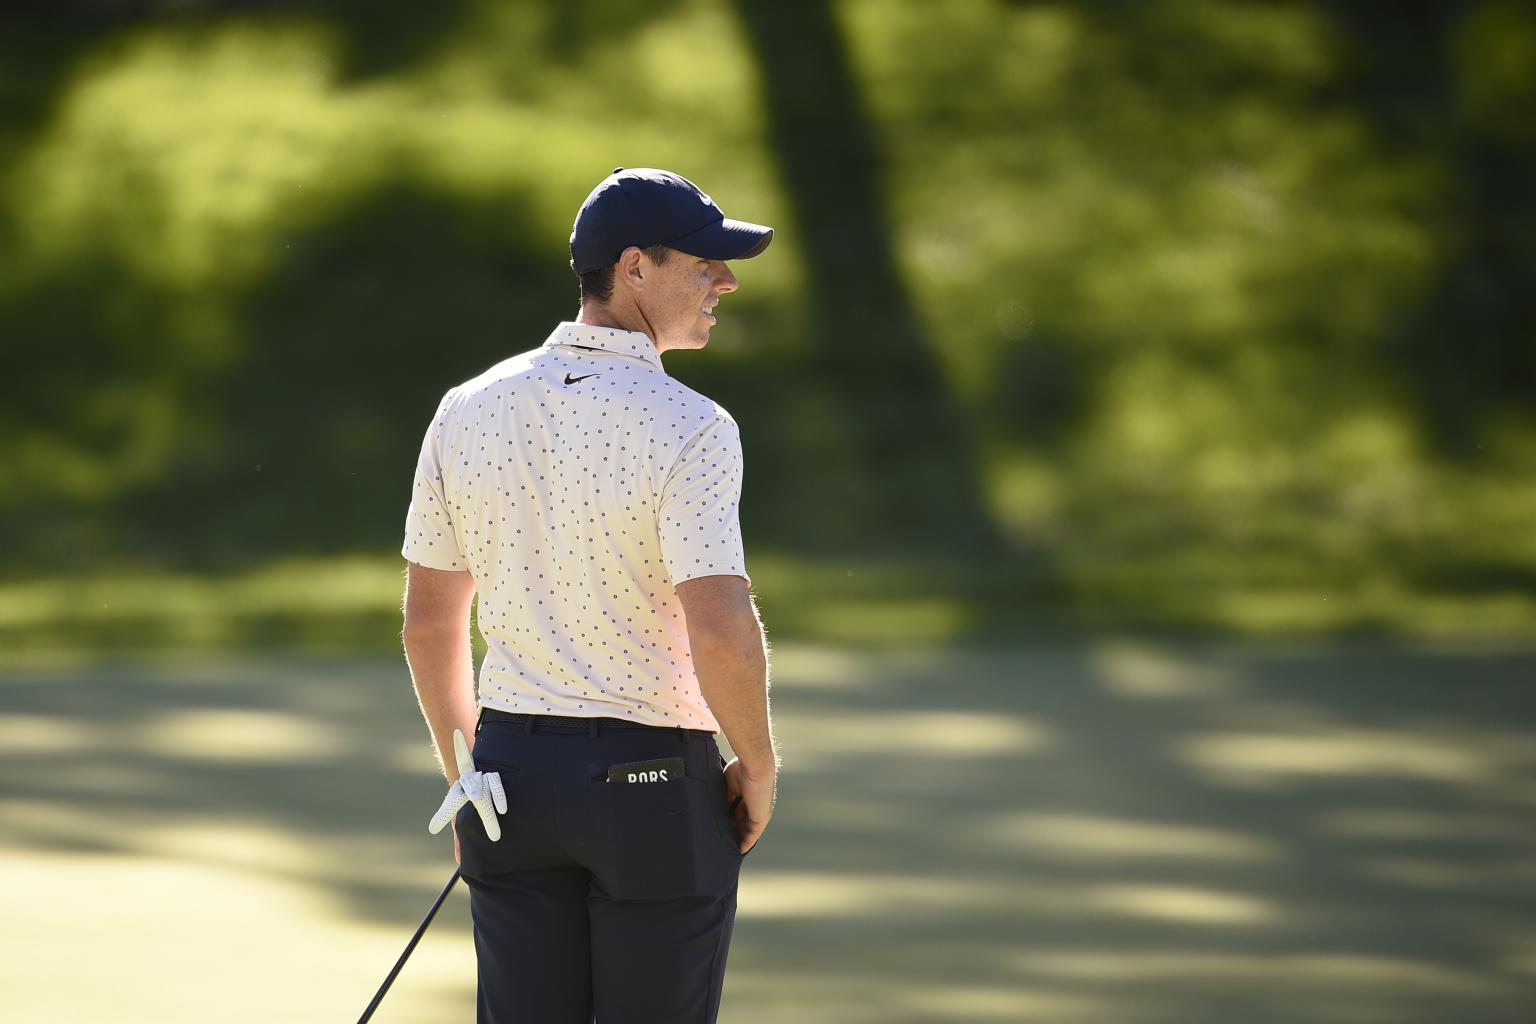 Dress like a PGA Tour player Where to find Rory McIlroy's Nike gear